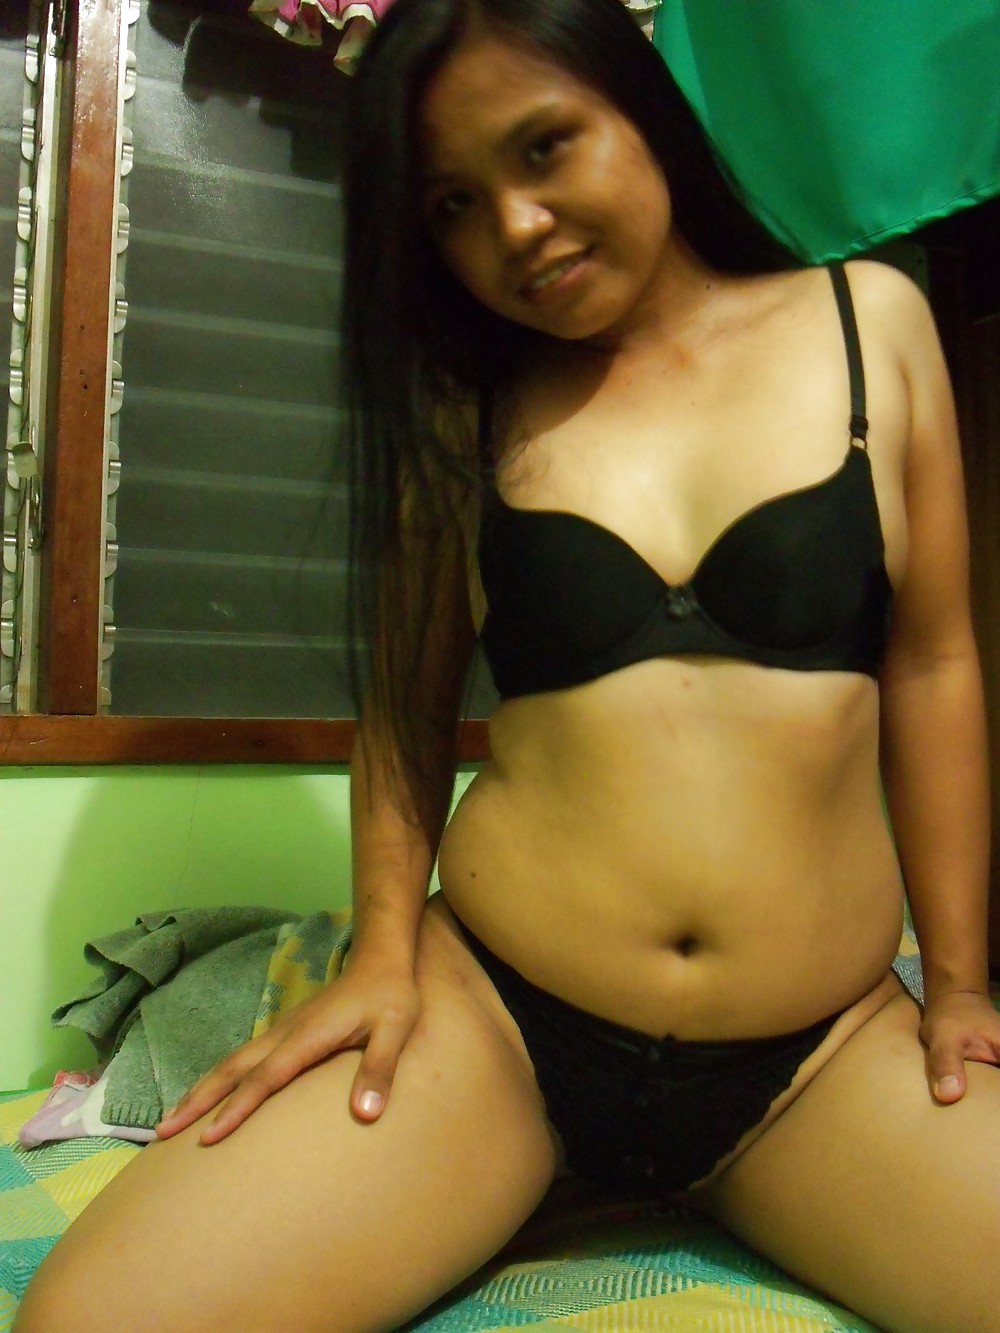 Her name is Ivy she is Filipino met her online  #24790908